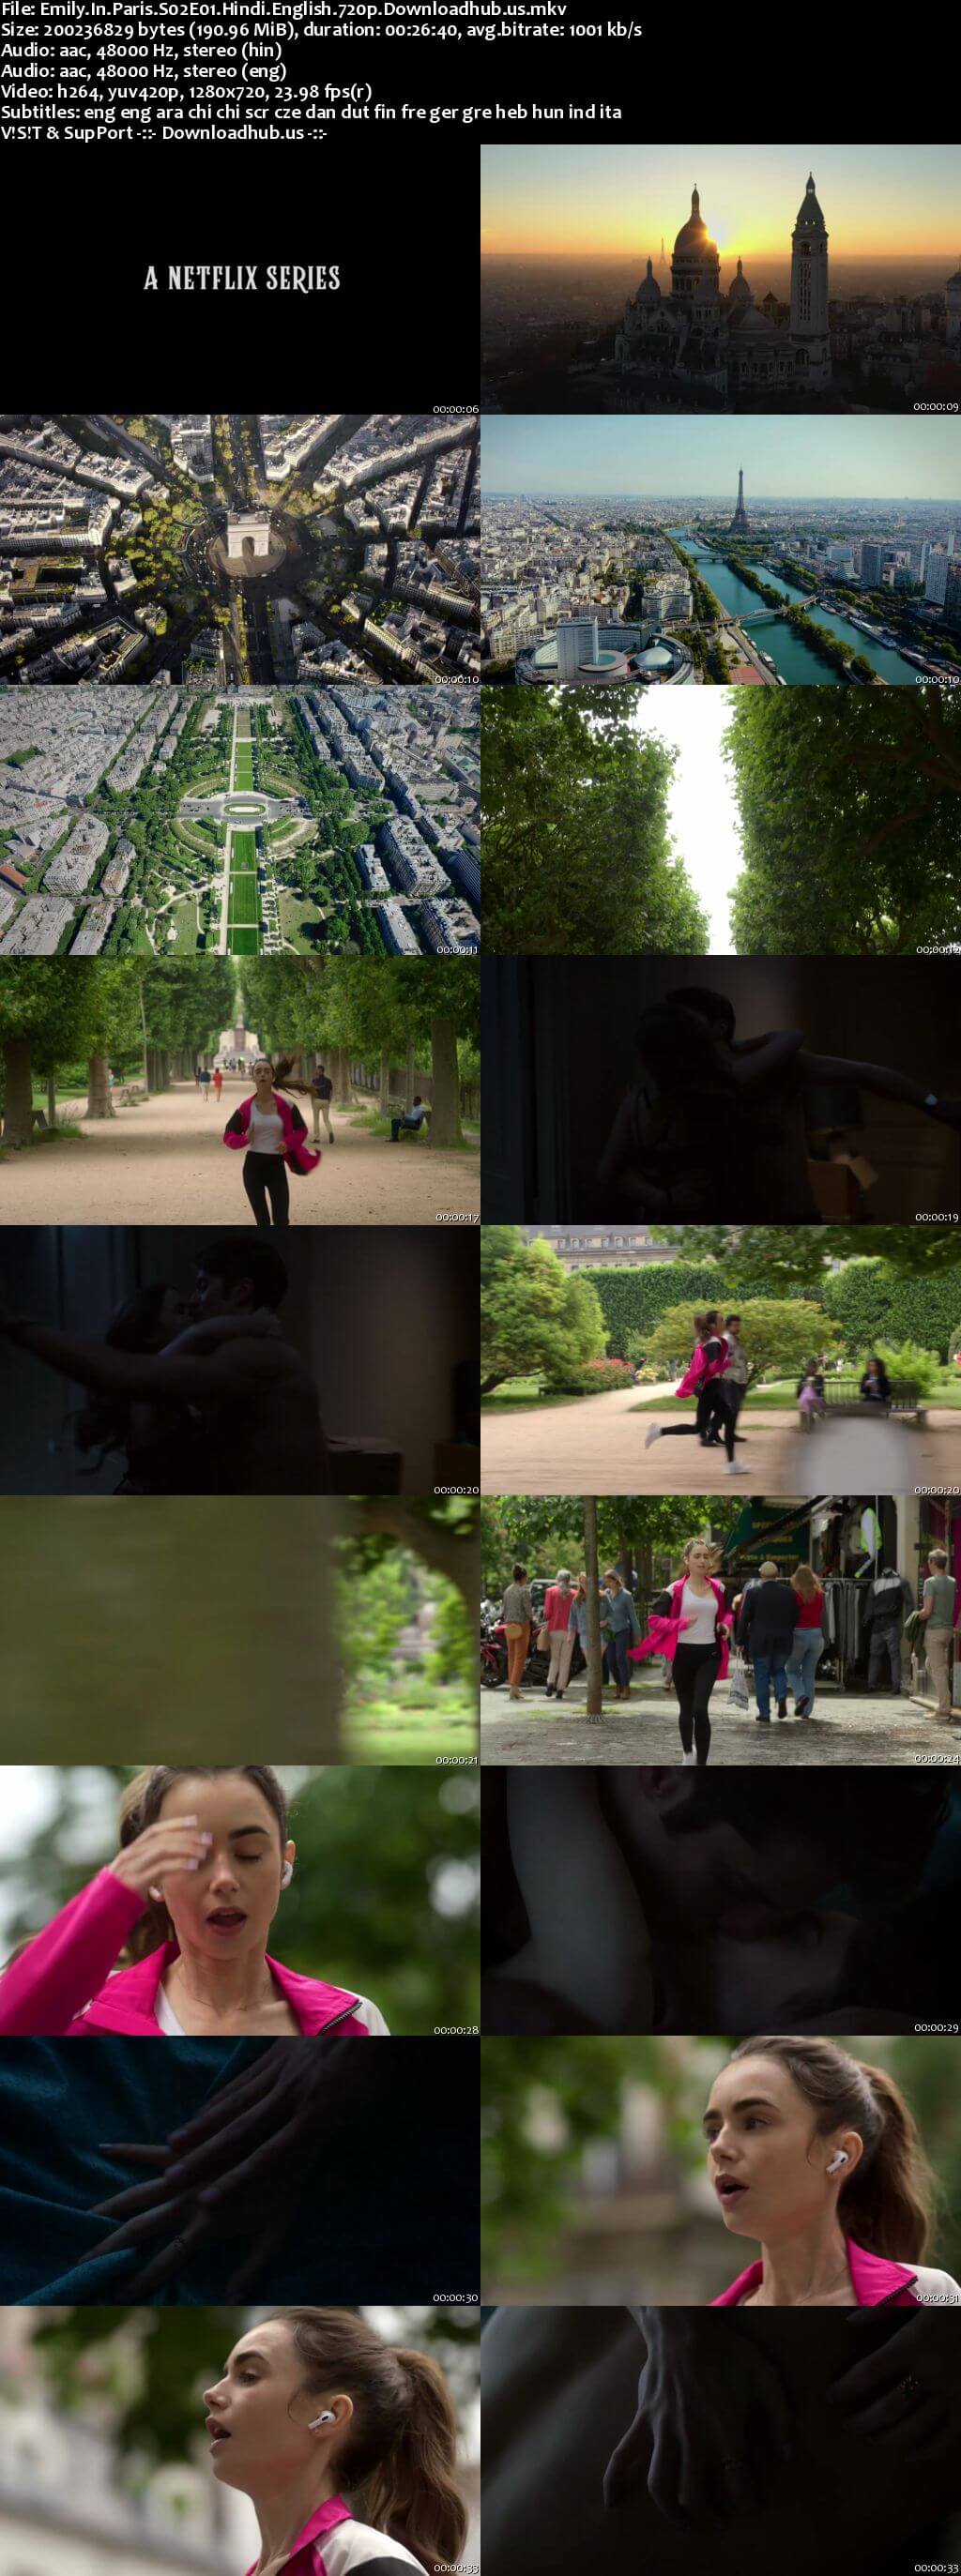 Emily in Paris 2021 S02 Complete Hindi Dual Audio 720p Web-DL MSubs